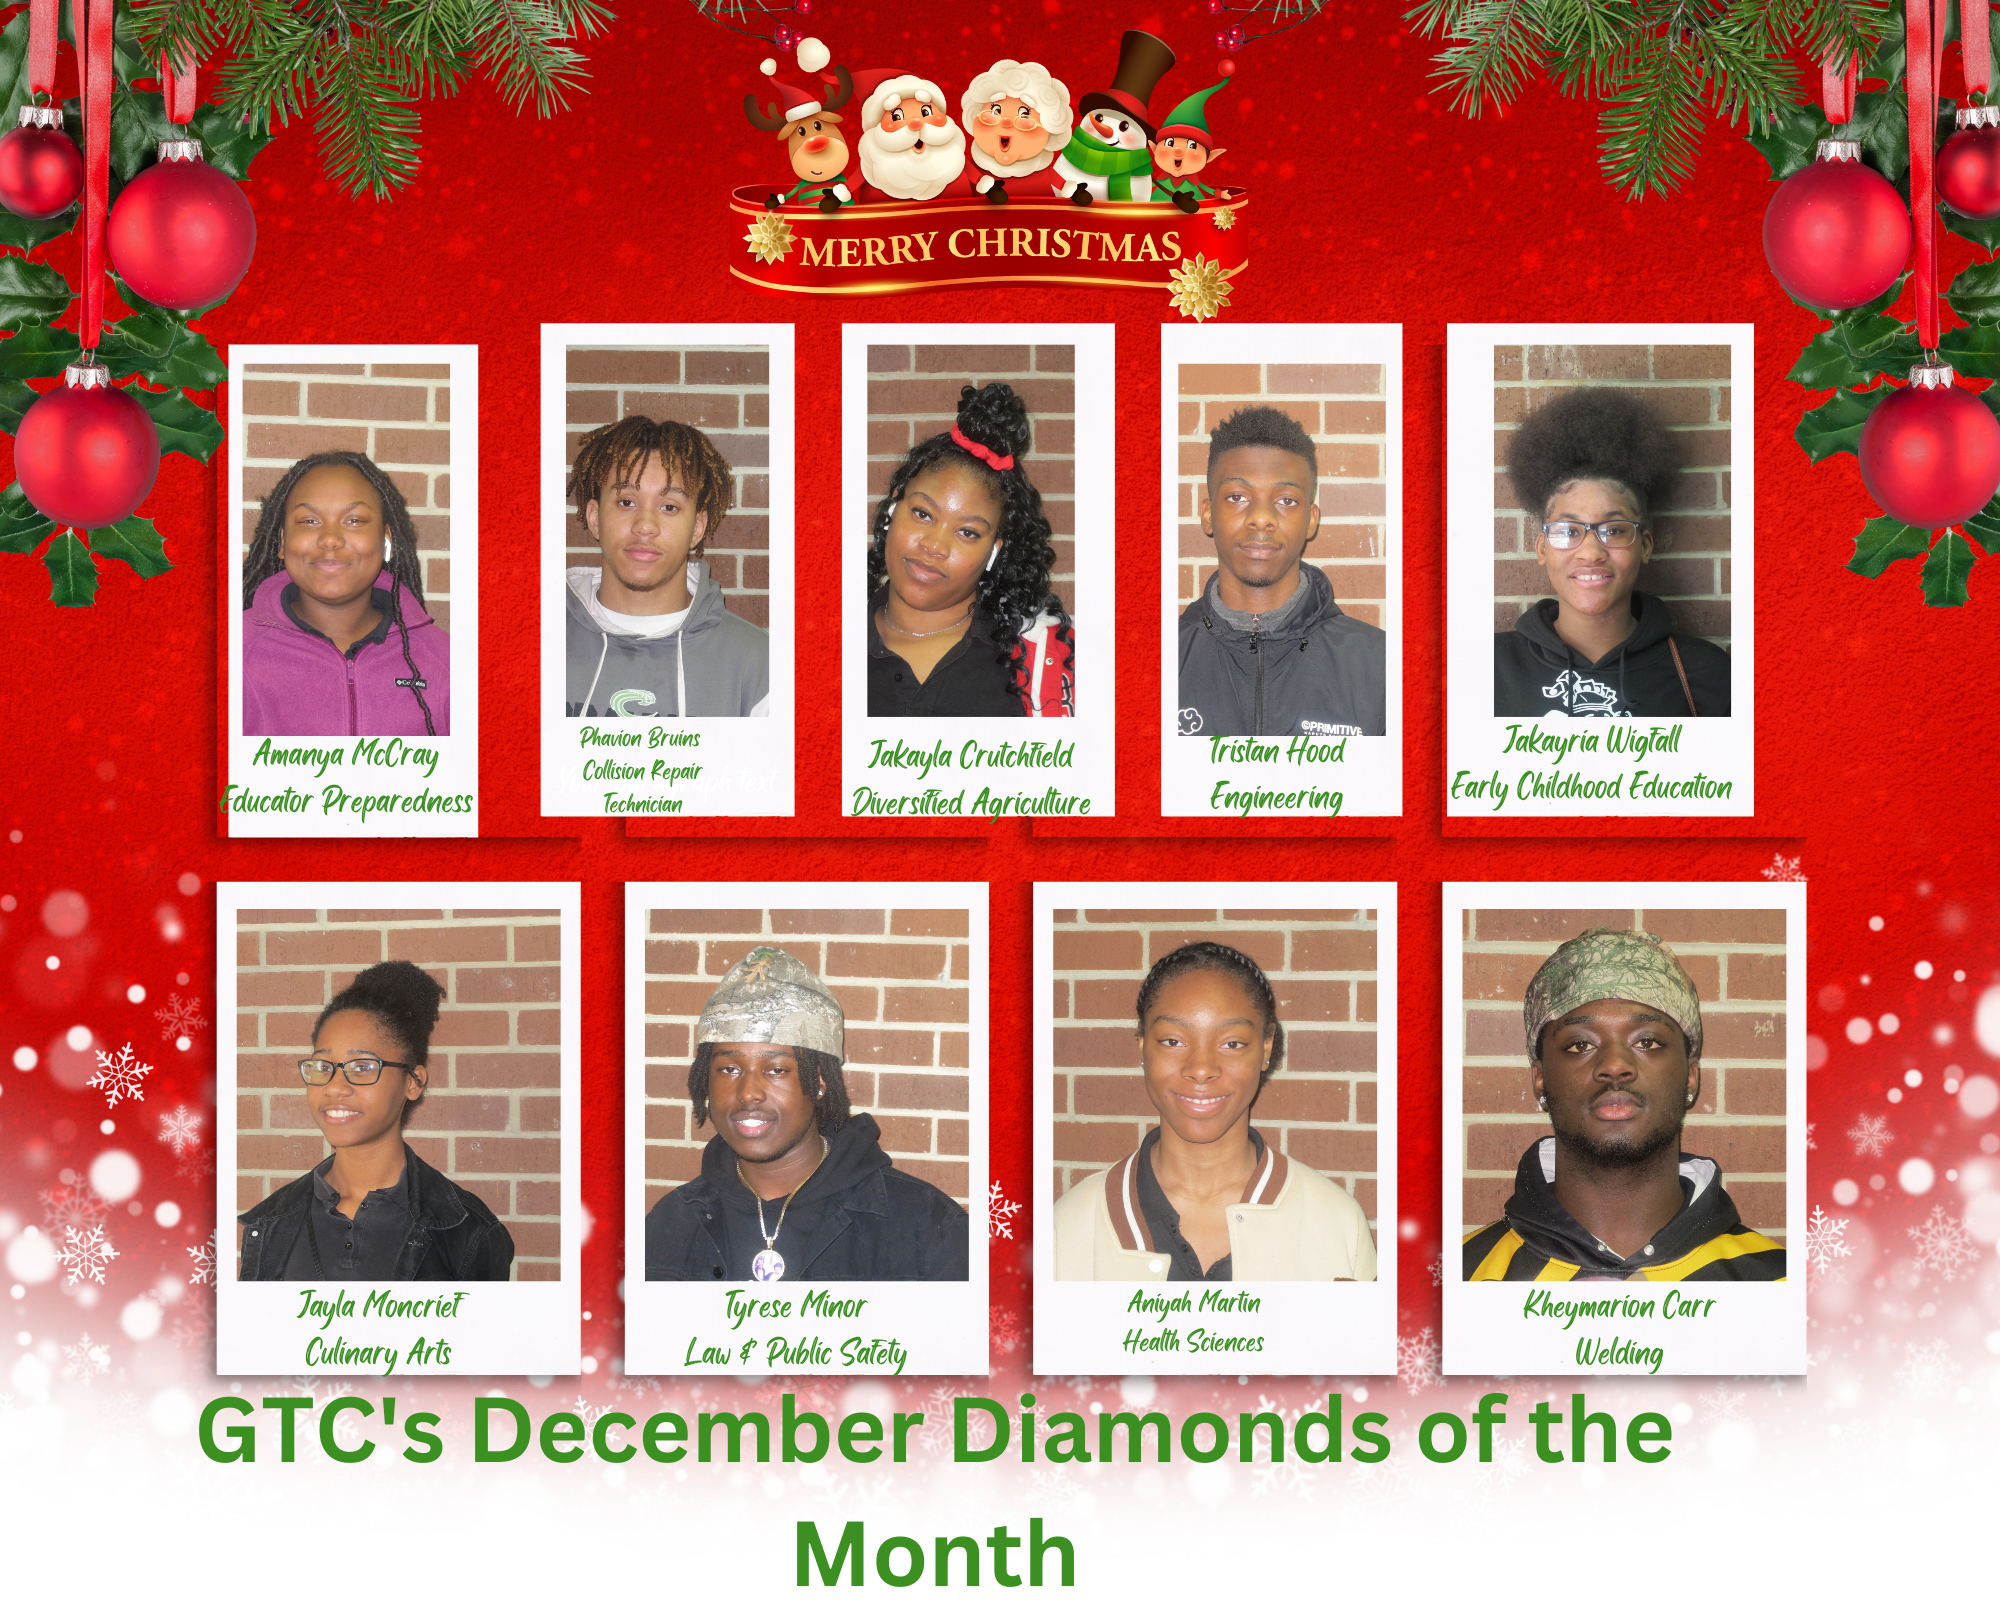 Merry Christmas from the GTC's December Diamonds of the Month Amanya McCray Educator Preparedness; Phavion Bruins Collision Repair Technician; Jakayria Wigfall Early Childhood Education; Jakayla Crutchfield Diversified Agriculture; Jayla Moncrief Culinary Arts; Tyrese Minor Law & Public Safety; Tristan Hood Engineering; Kheymarion Carr Welding; Aniyah Martin Health Sciences; not pictured Kaniya Hughes Work Based Learning